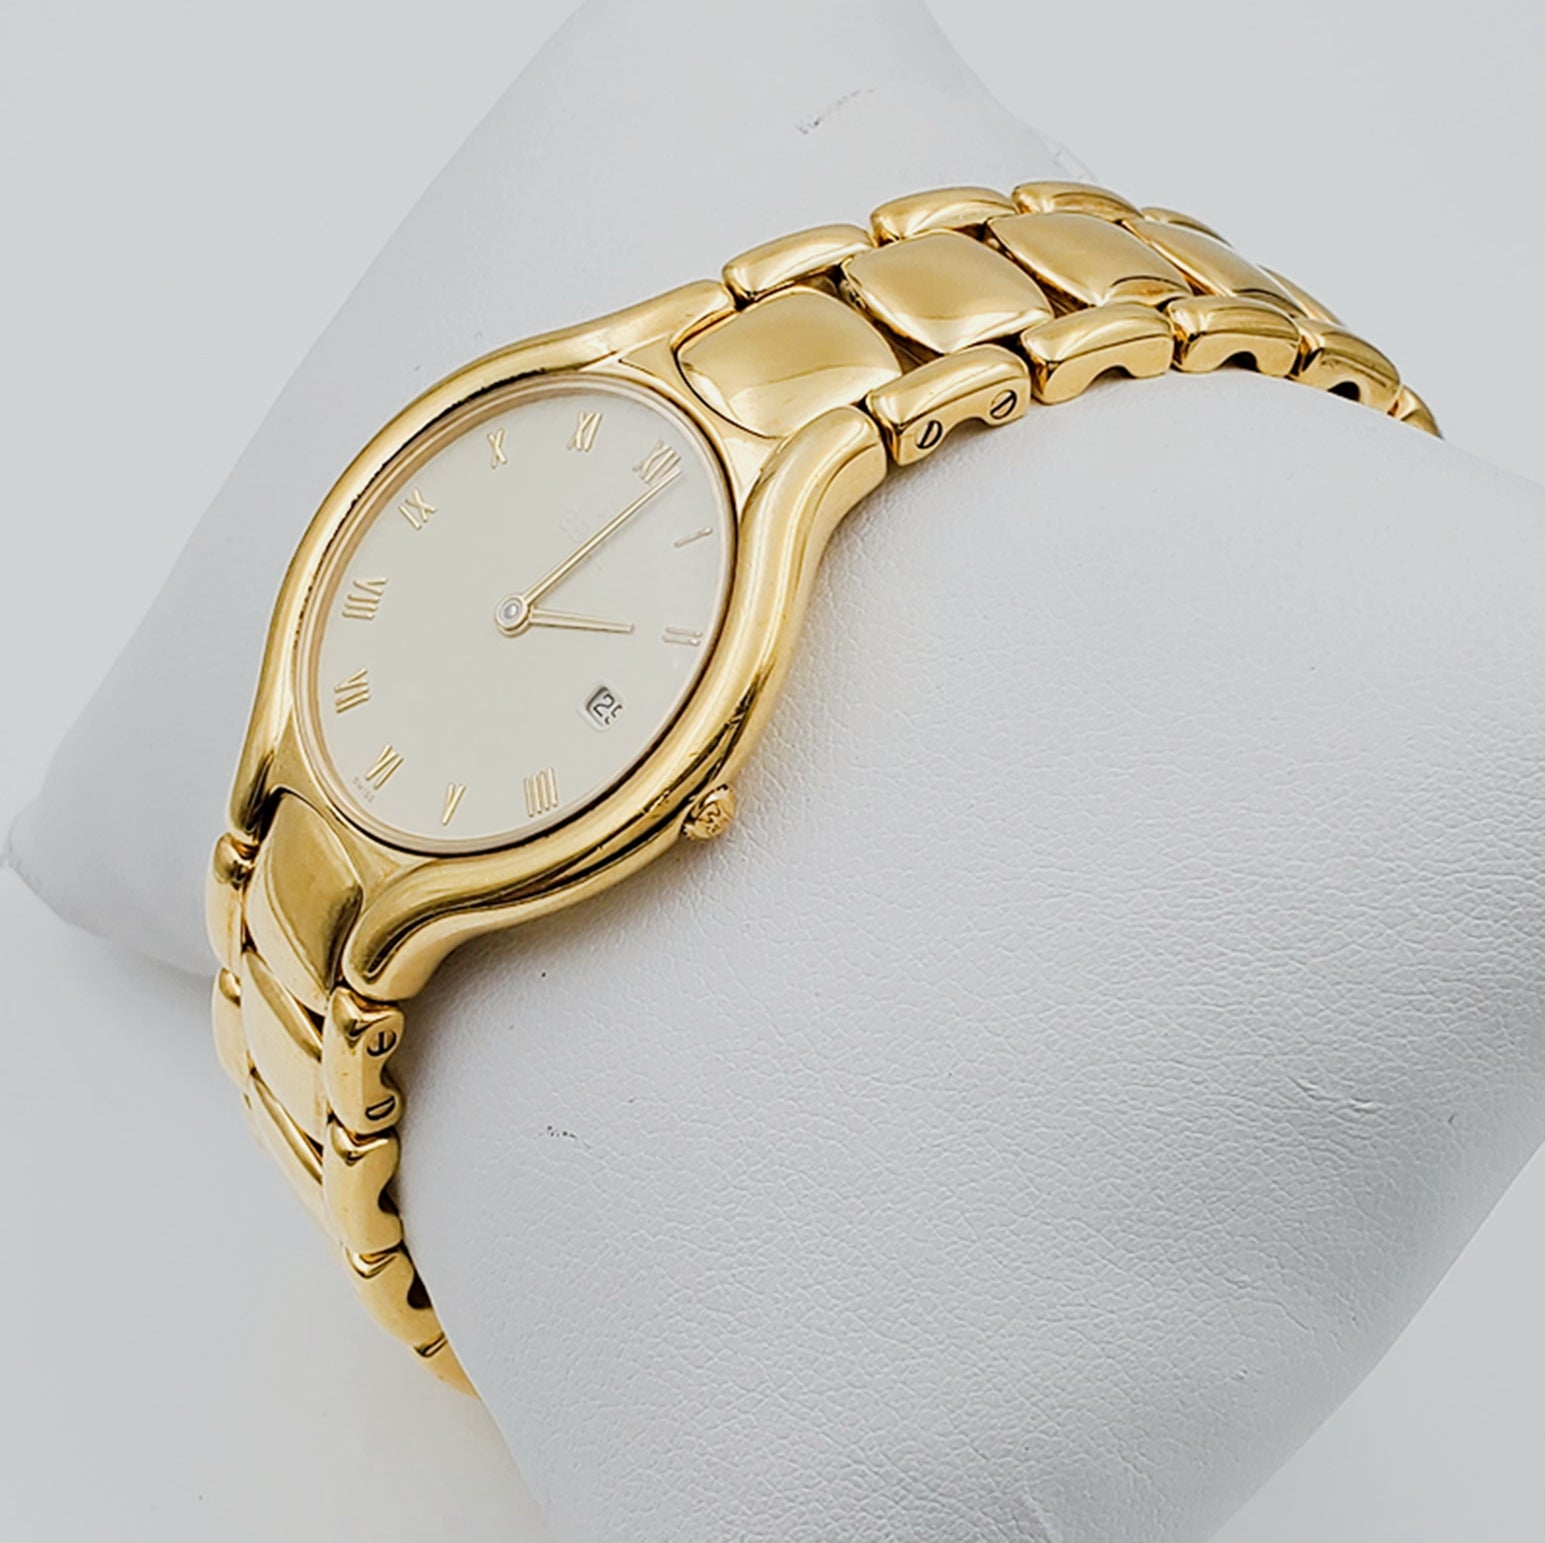 Unisex Ebel 31mm Beluga 18K Solid Yellow Gold Watch with Cream Dial and Roman Numeral. (Pre-Owned)